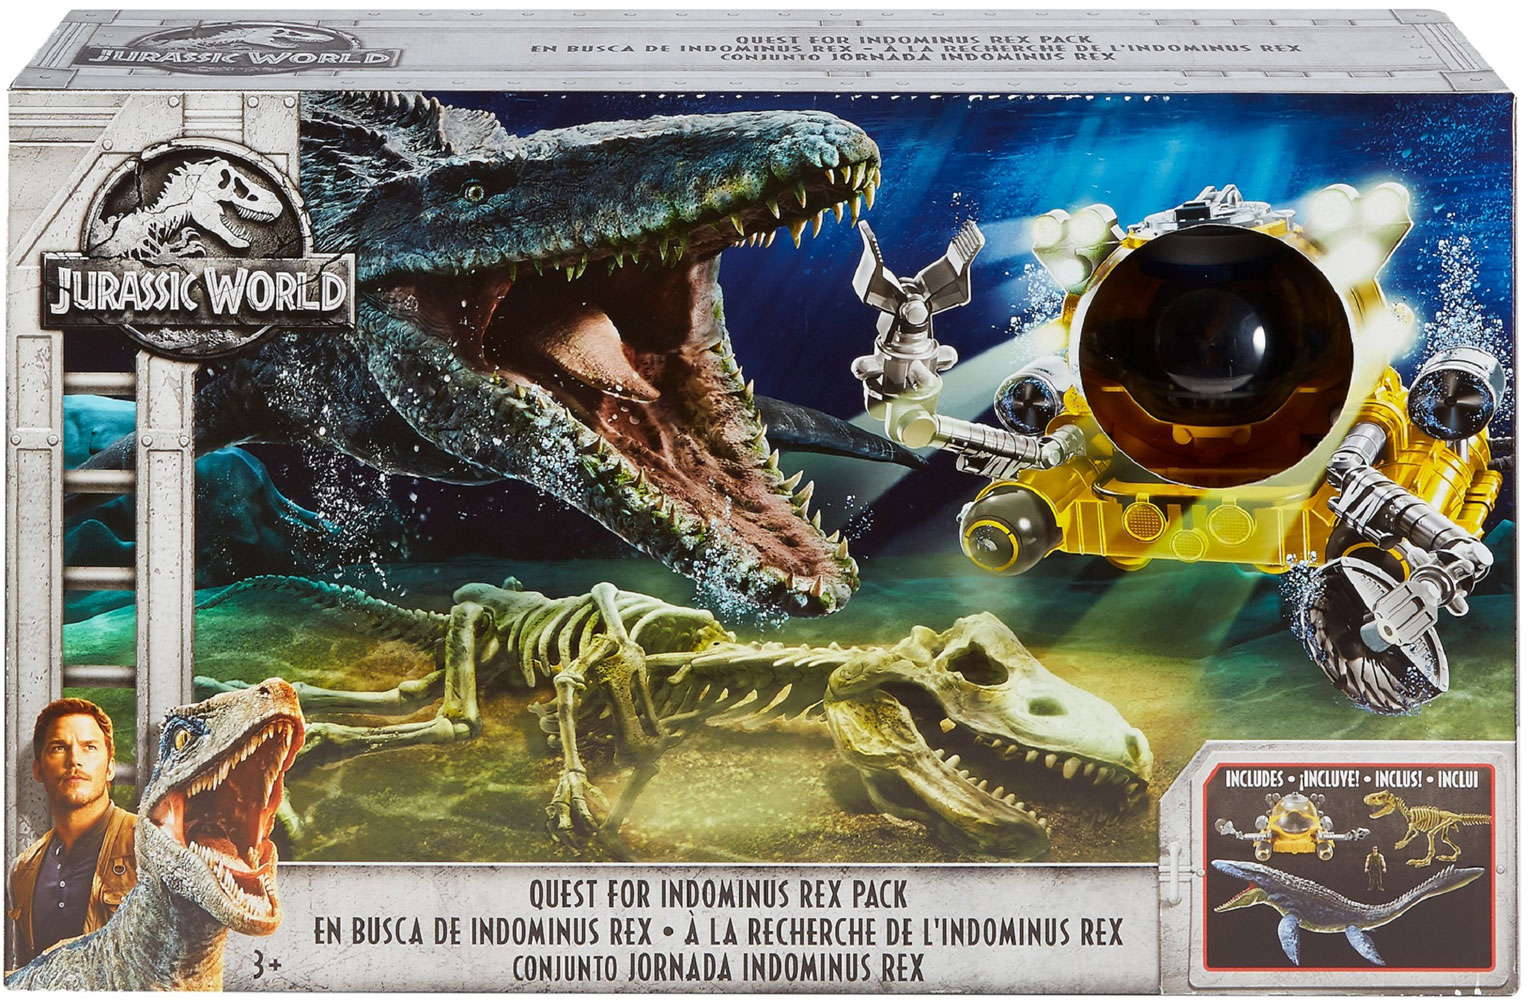 jurassic world quest for indominus rex pack playset